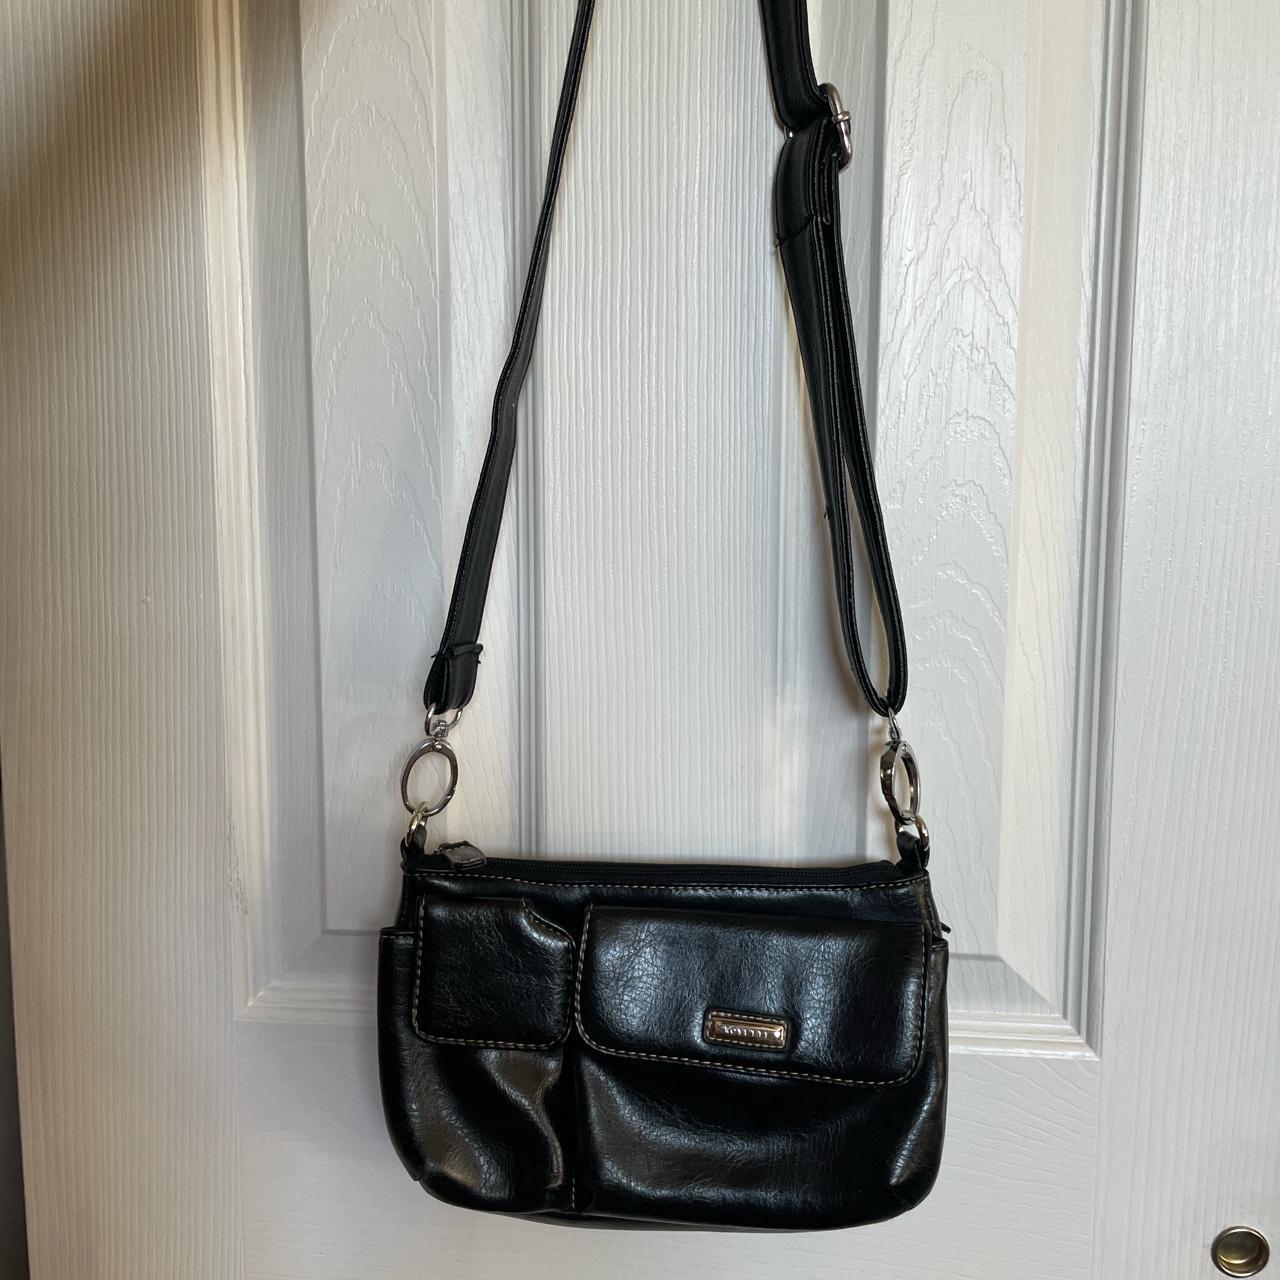 Small Rosetti bag. Can be worn as a crossbody or... - Depop